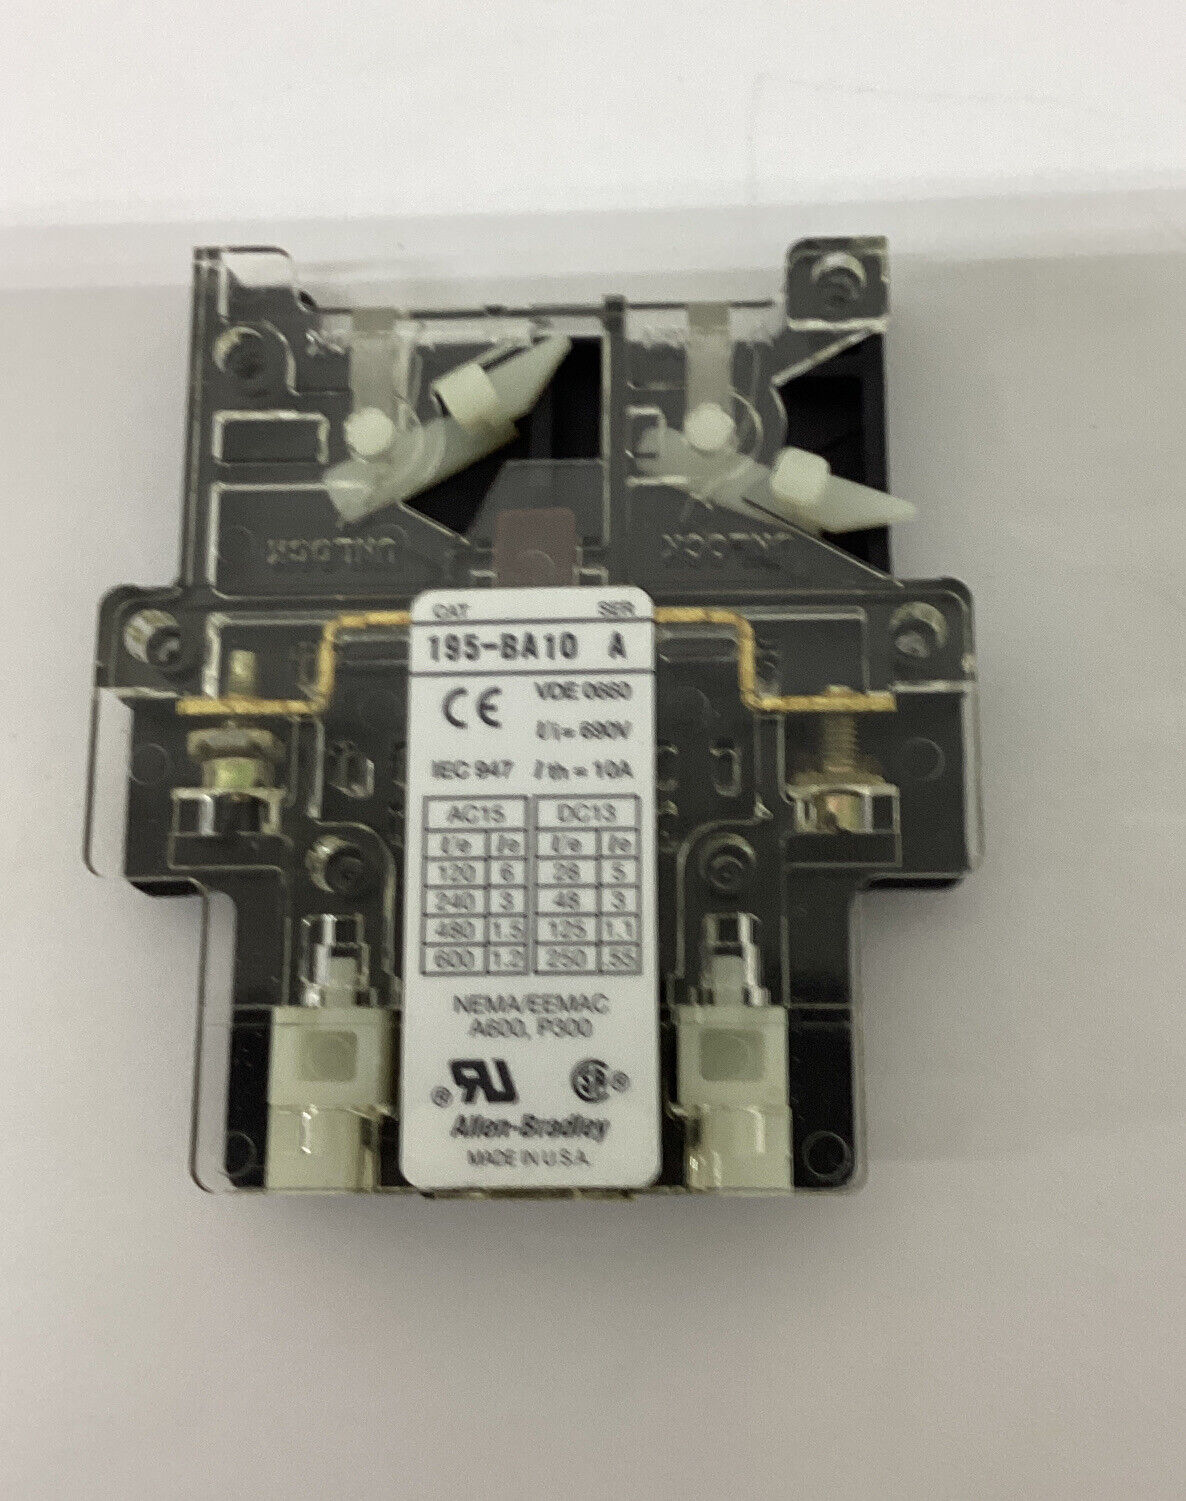 Allen Bradley  195-BA10  Ser. A  10 Amp  Auxiliary Contact /  Switch (CL243) - 0